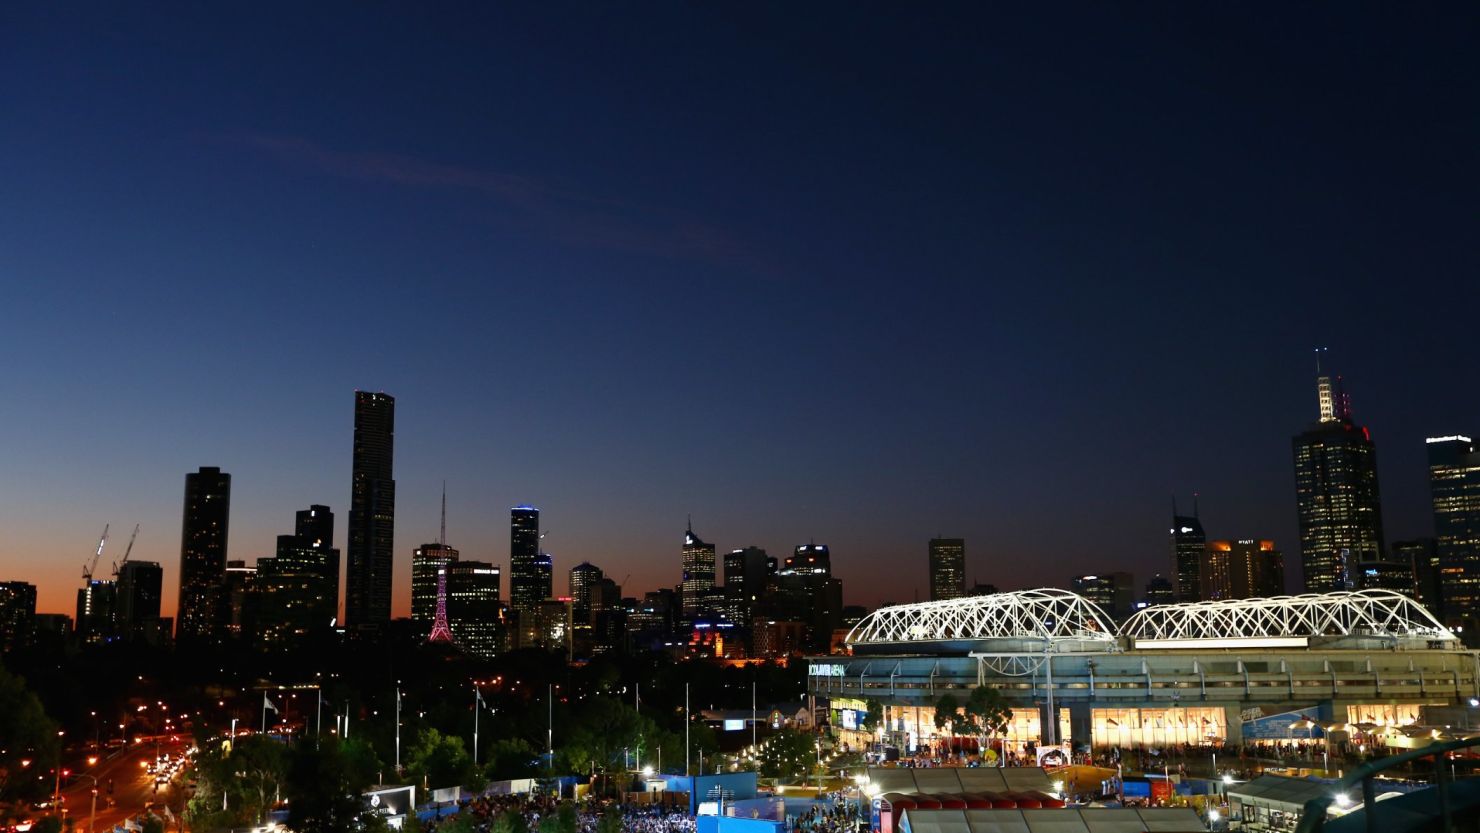 MELBOURNE, AUSTRALIA - JANUARY 21:  A general view is seen of the city skyline over Melbourne Park during day three of the 2015 Australian Open at Melbourne Park on January 21, 2015 in Melbourne, Australia.  (Photo by Clive Brunskill/Getty Images)